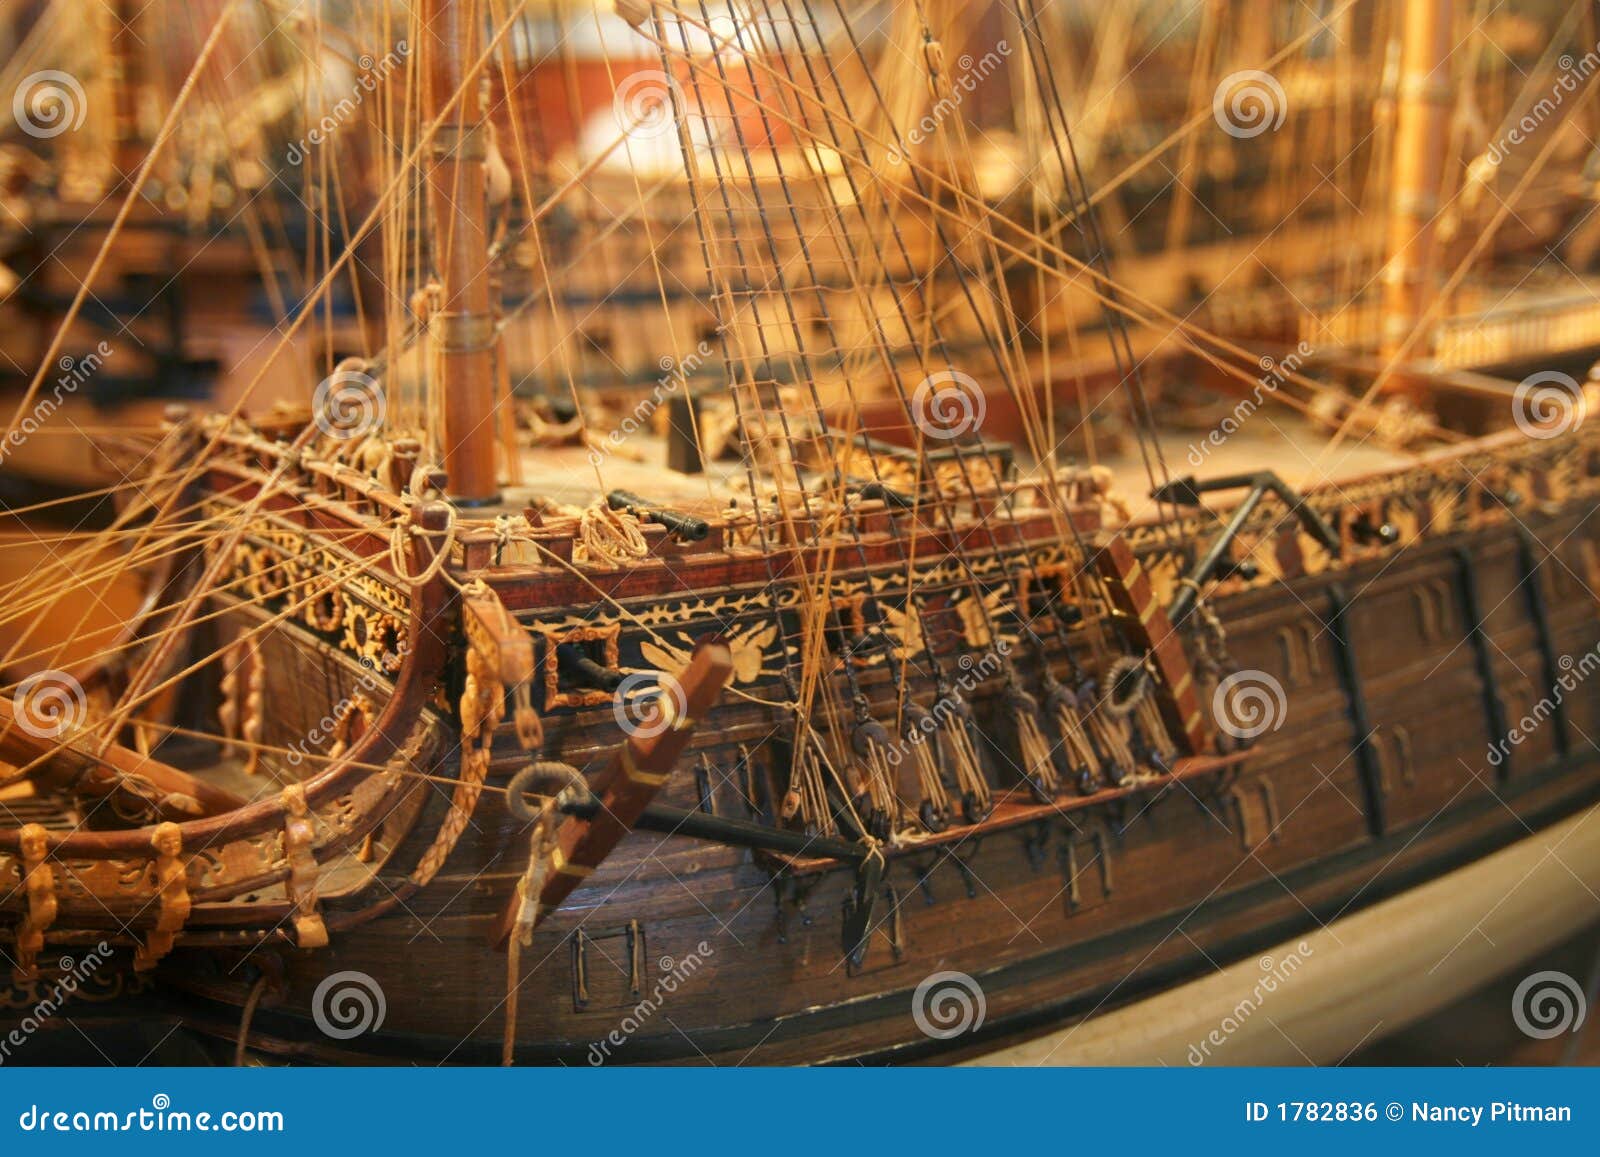 Model of masted or pirate ship, with intricate detailing.